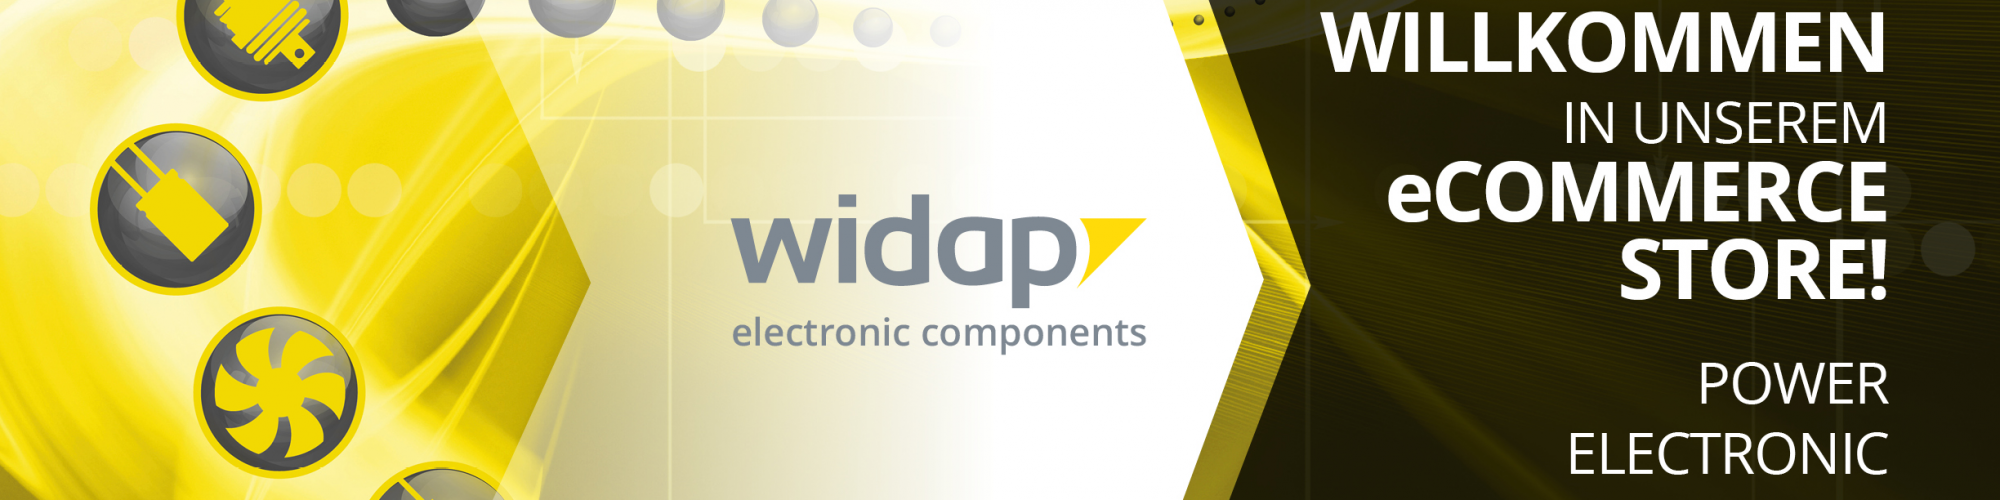 widap electronic components